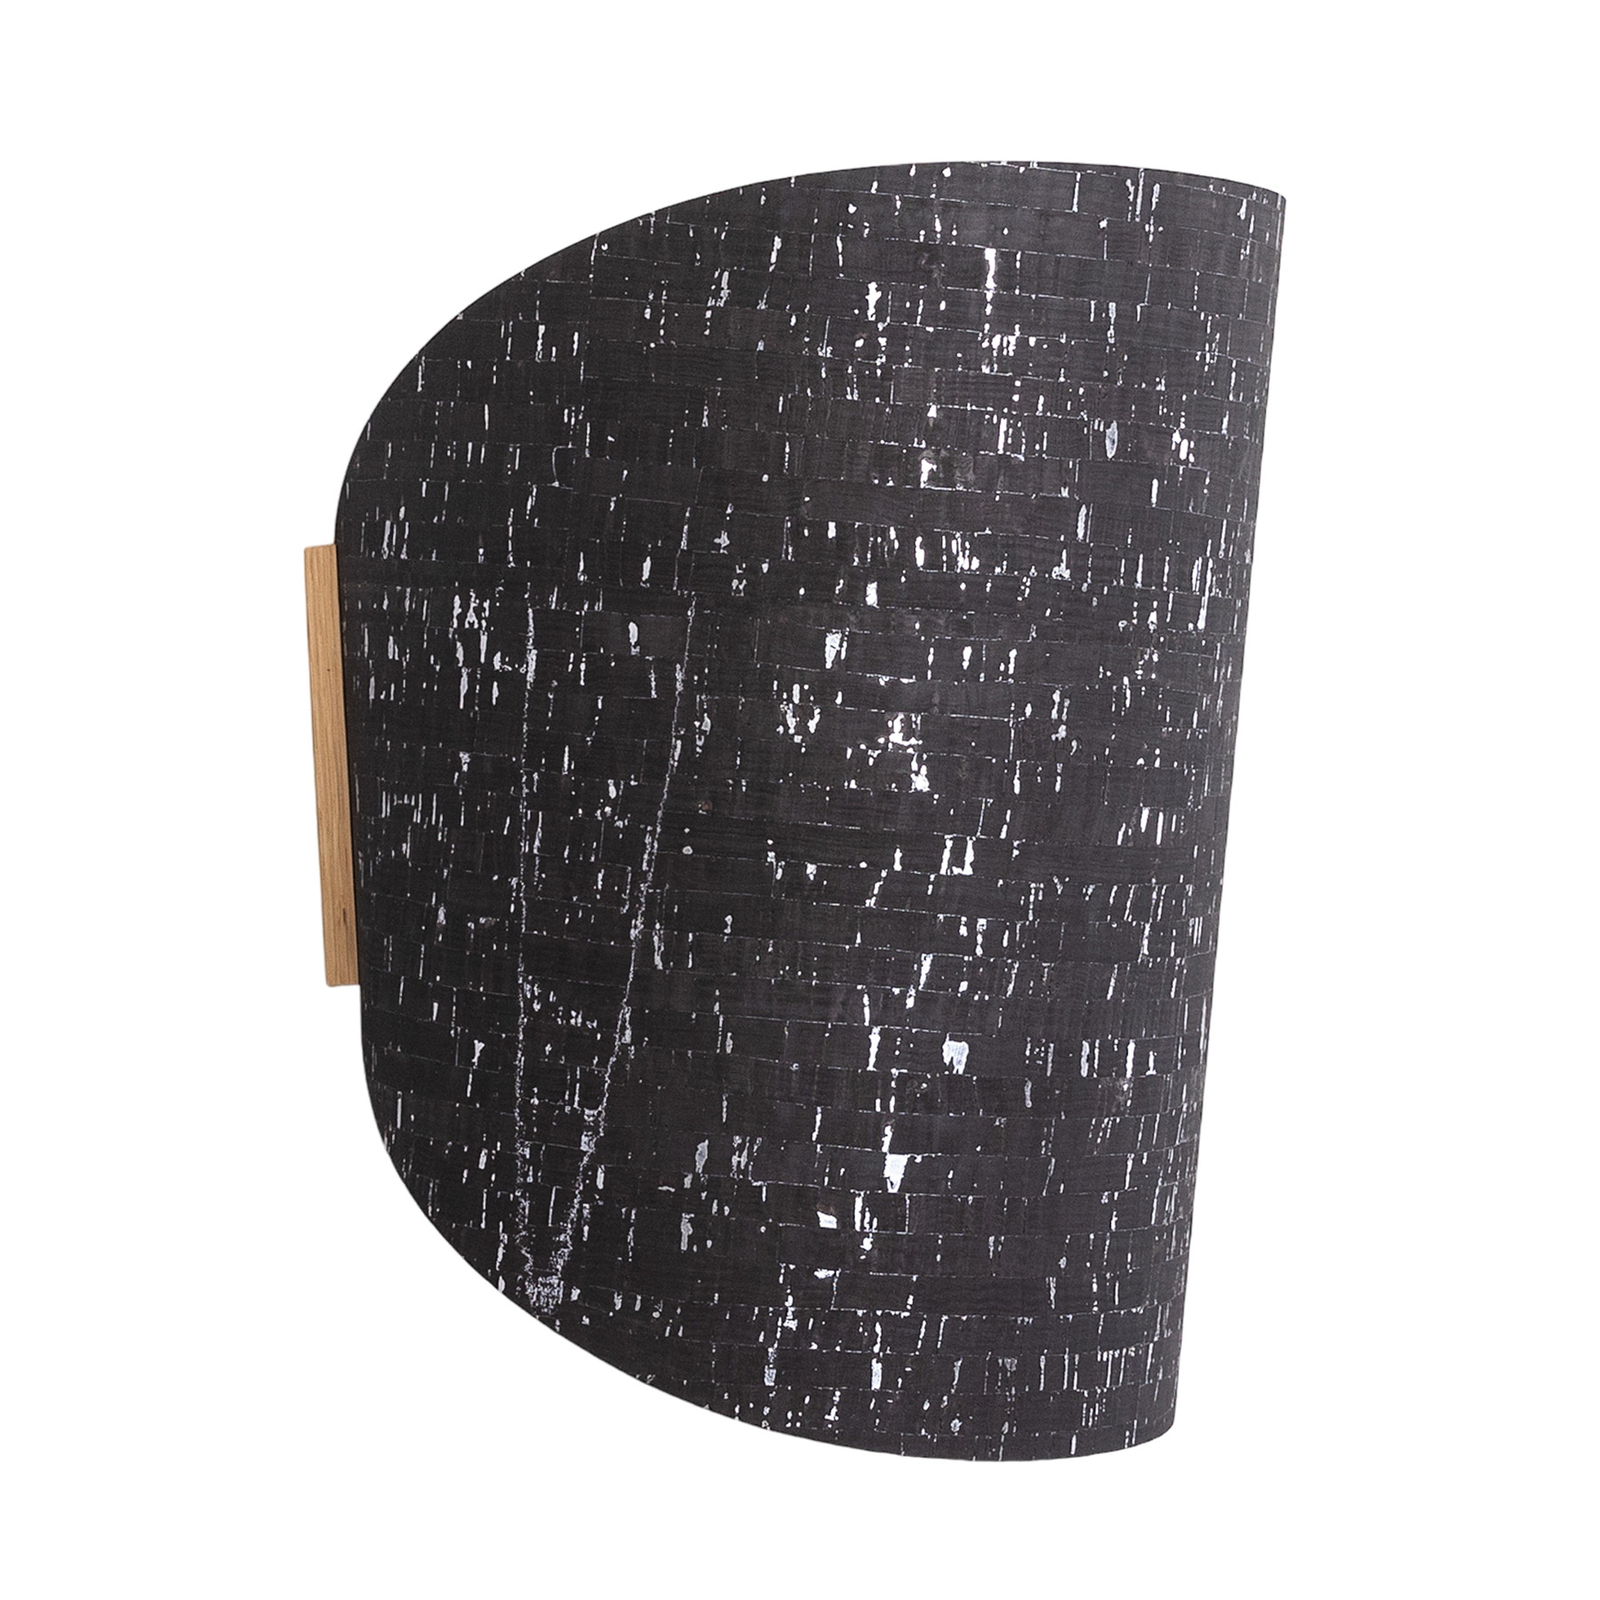 ALMUT 1411 wall light curved cork